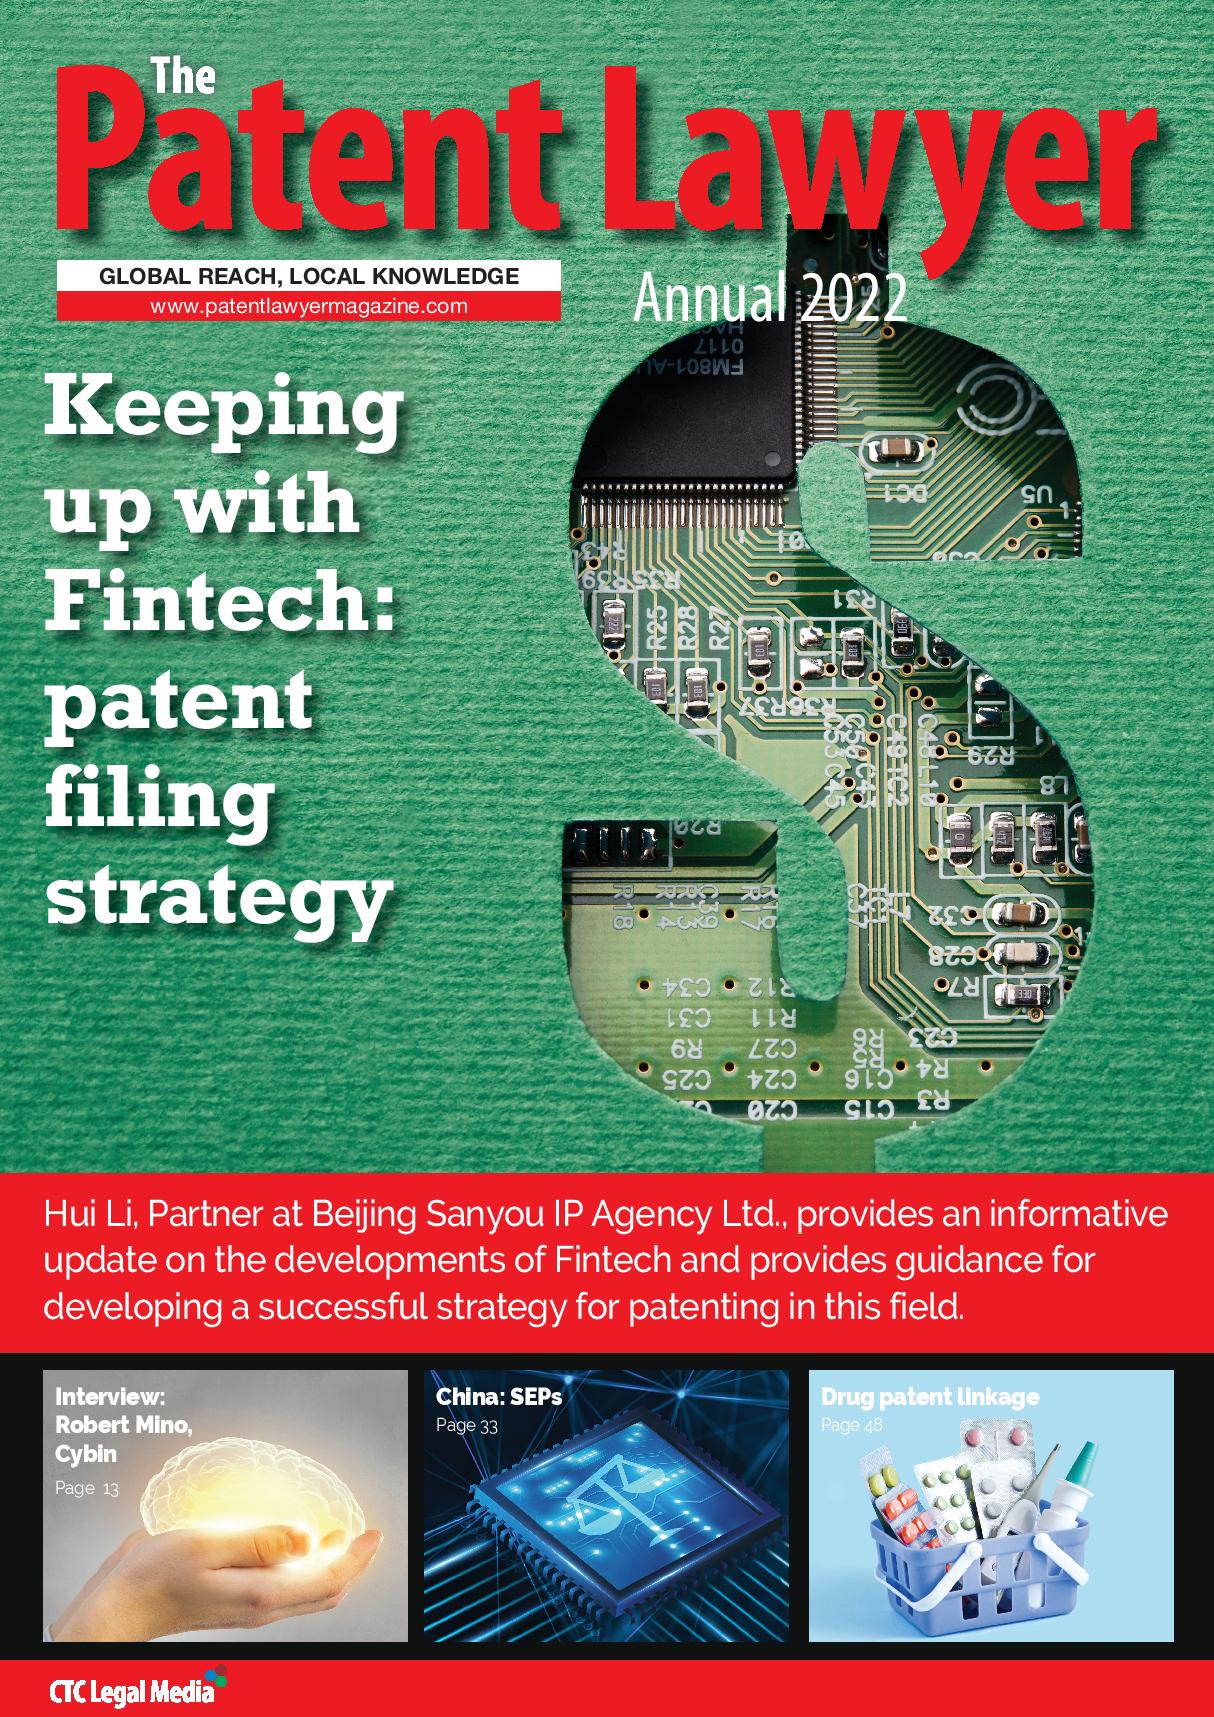 The Patent Lawyer Annual 2022